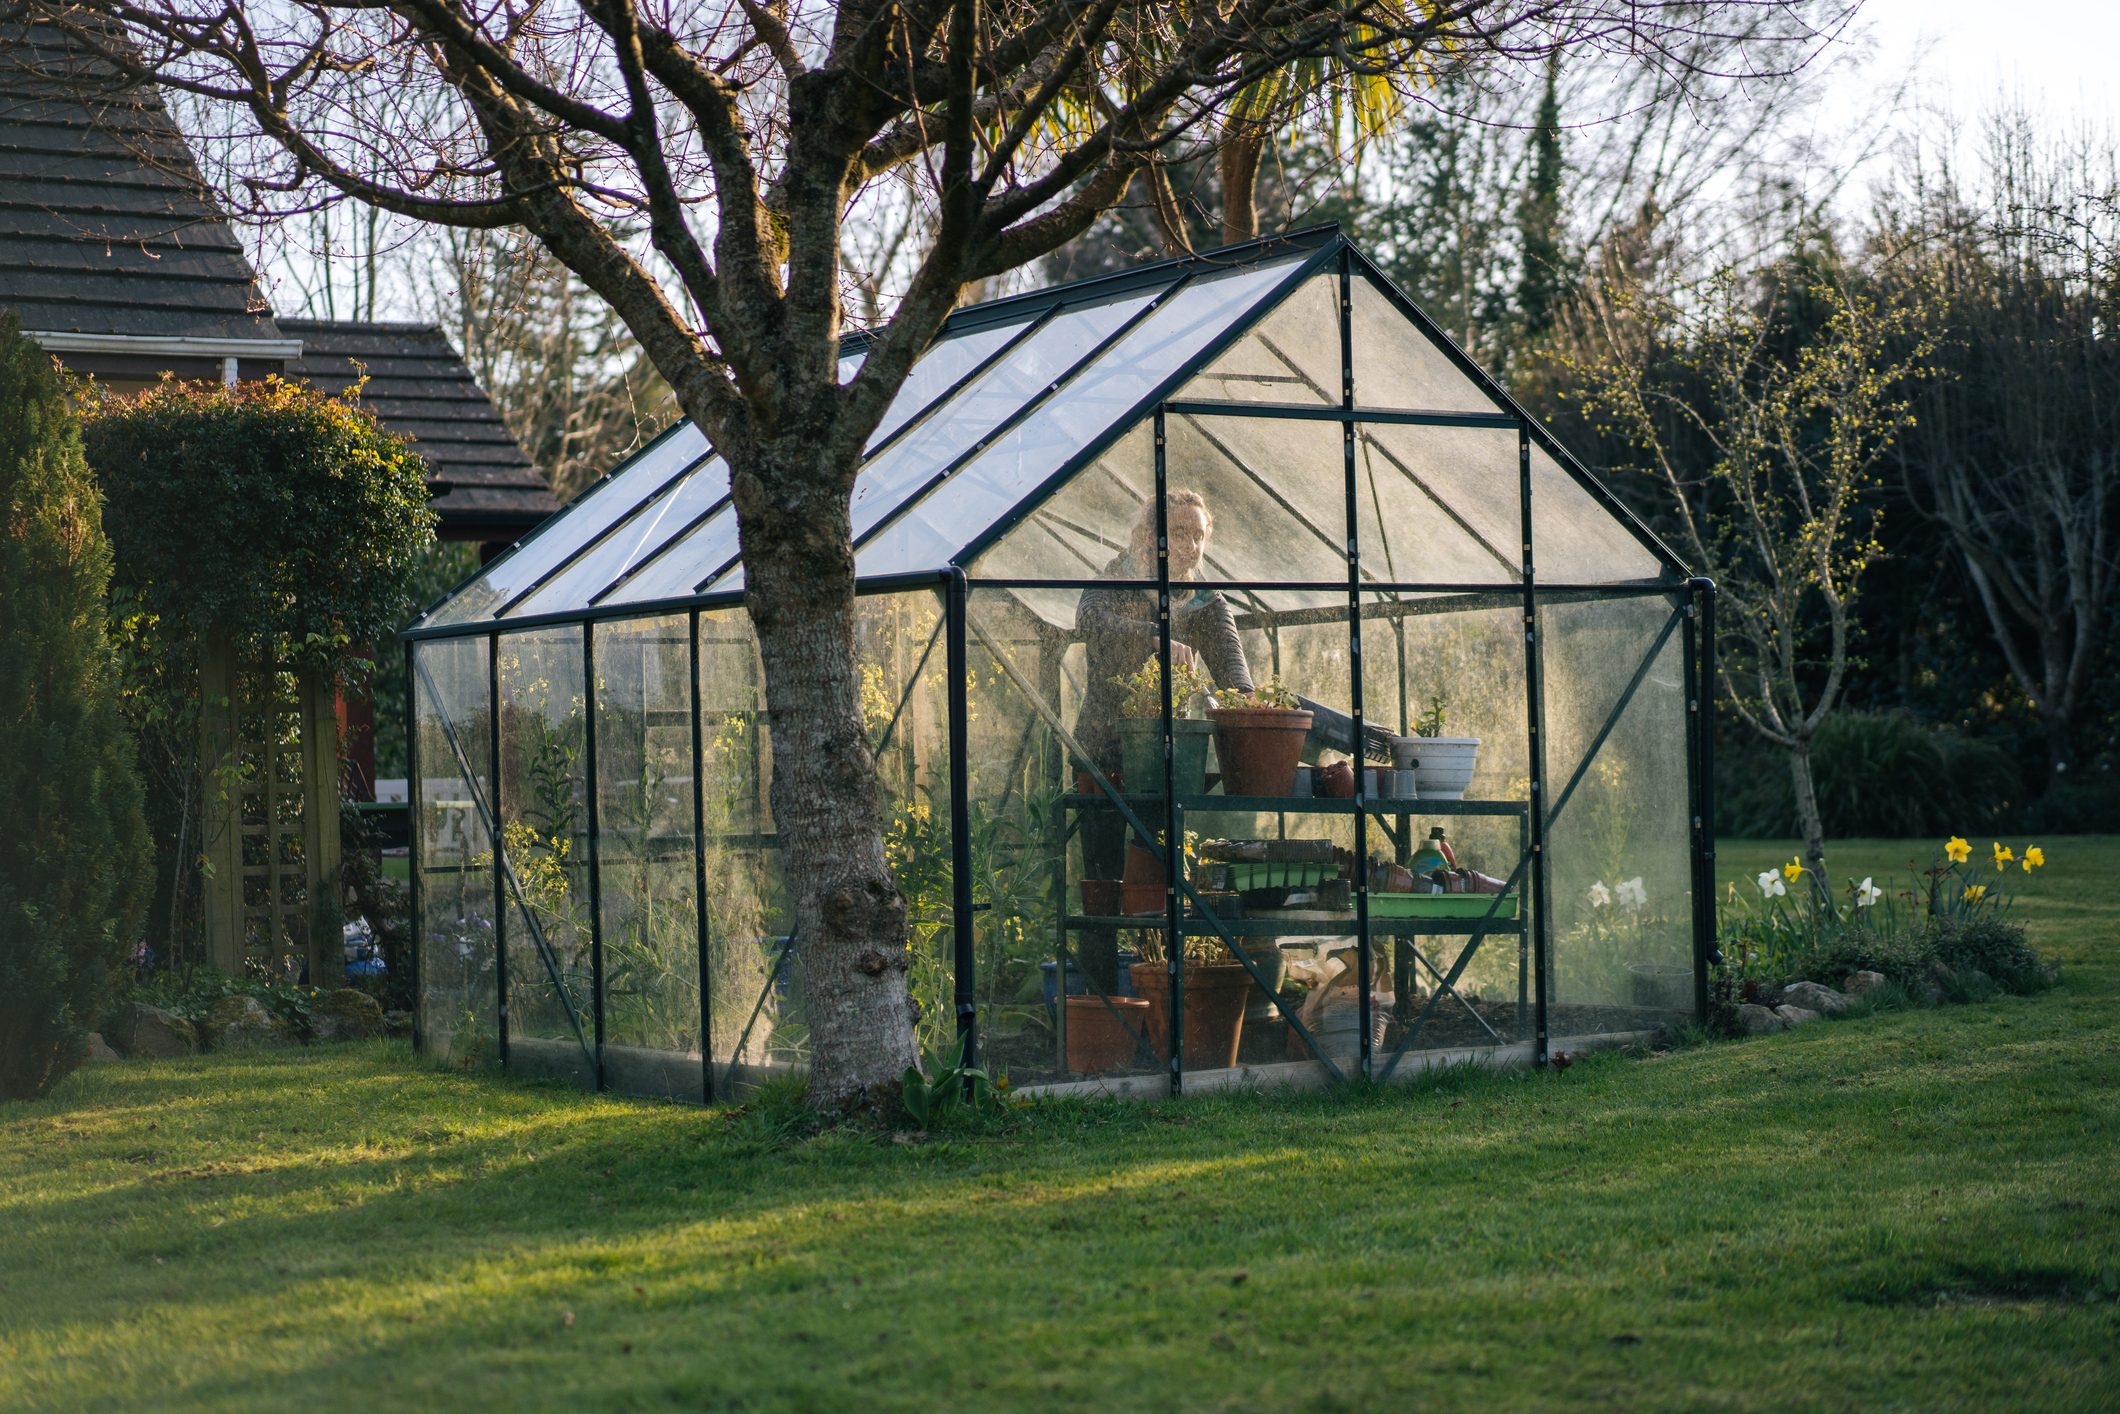 Young woman tends to her garden in a backyard greenhouse